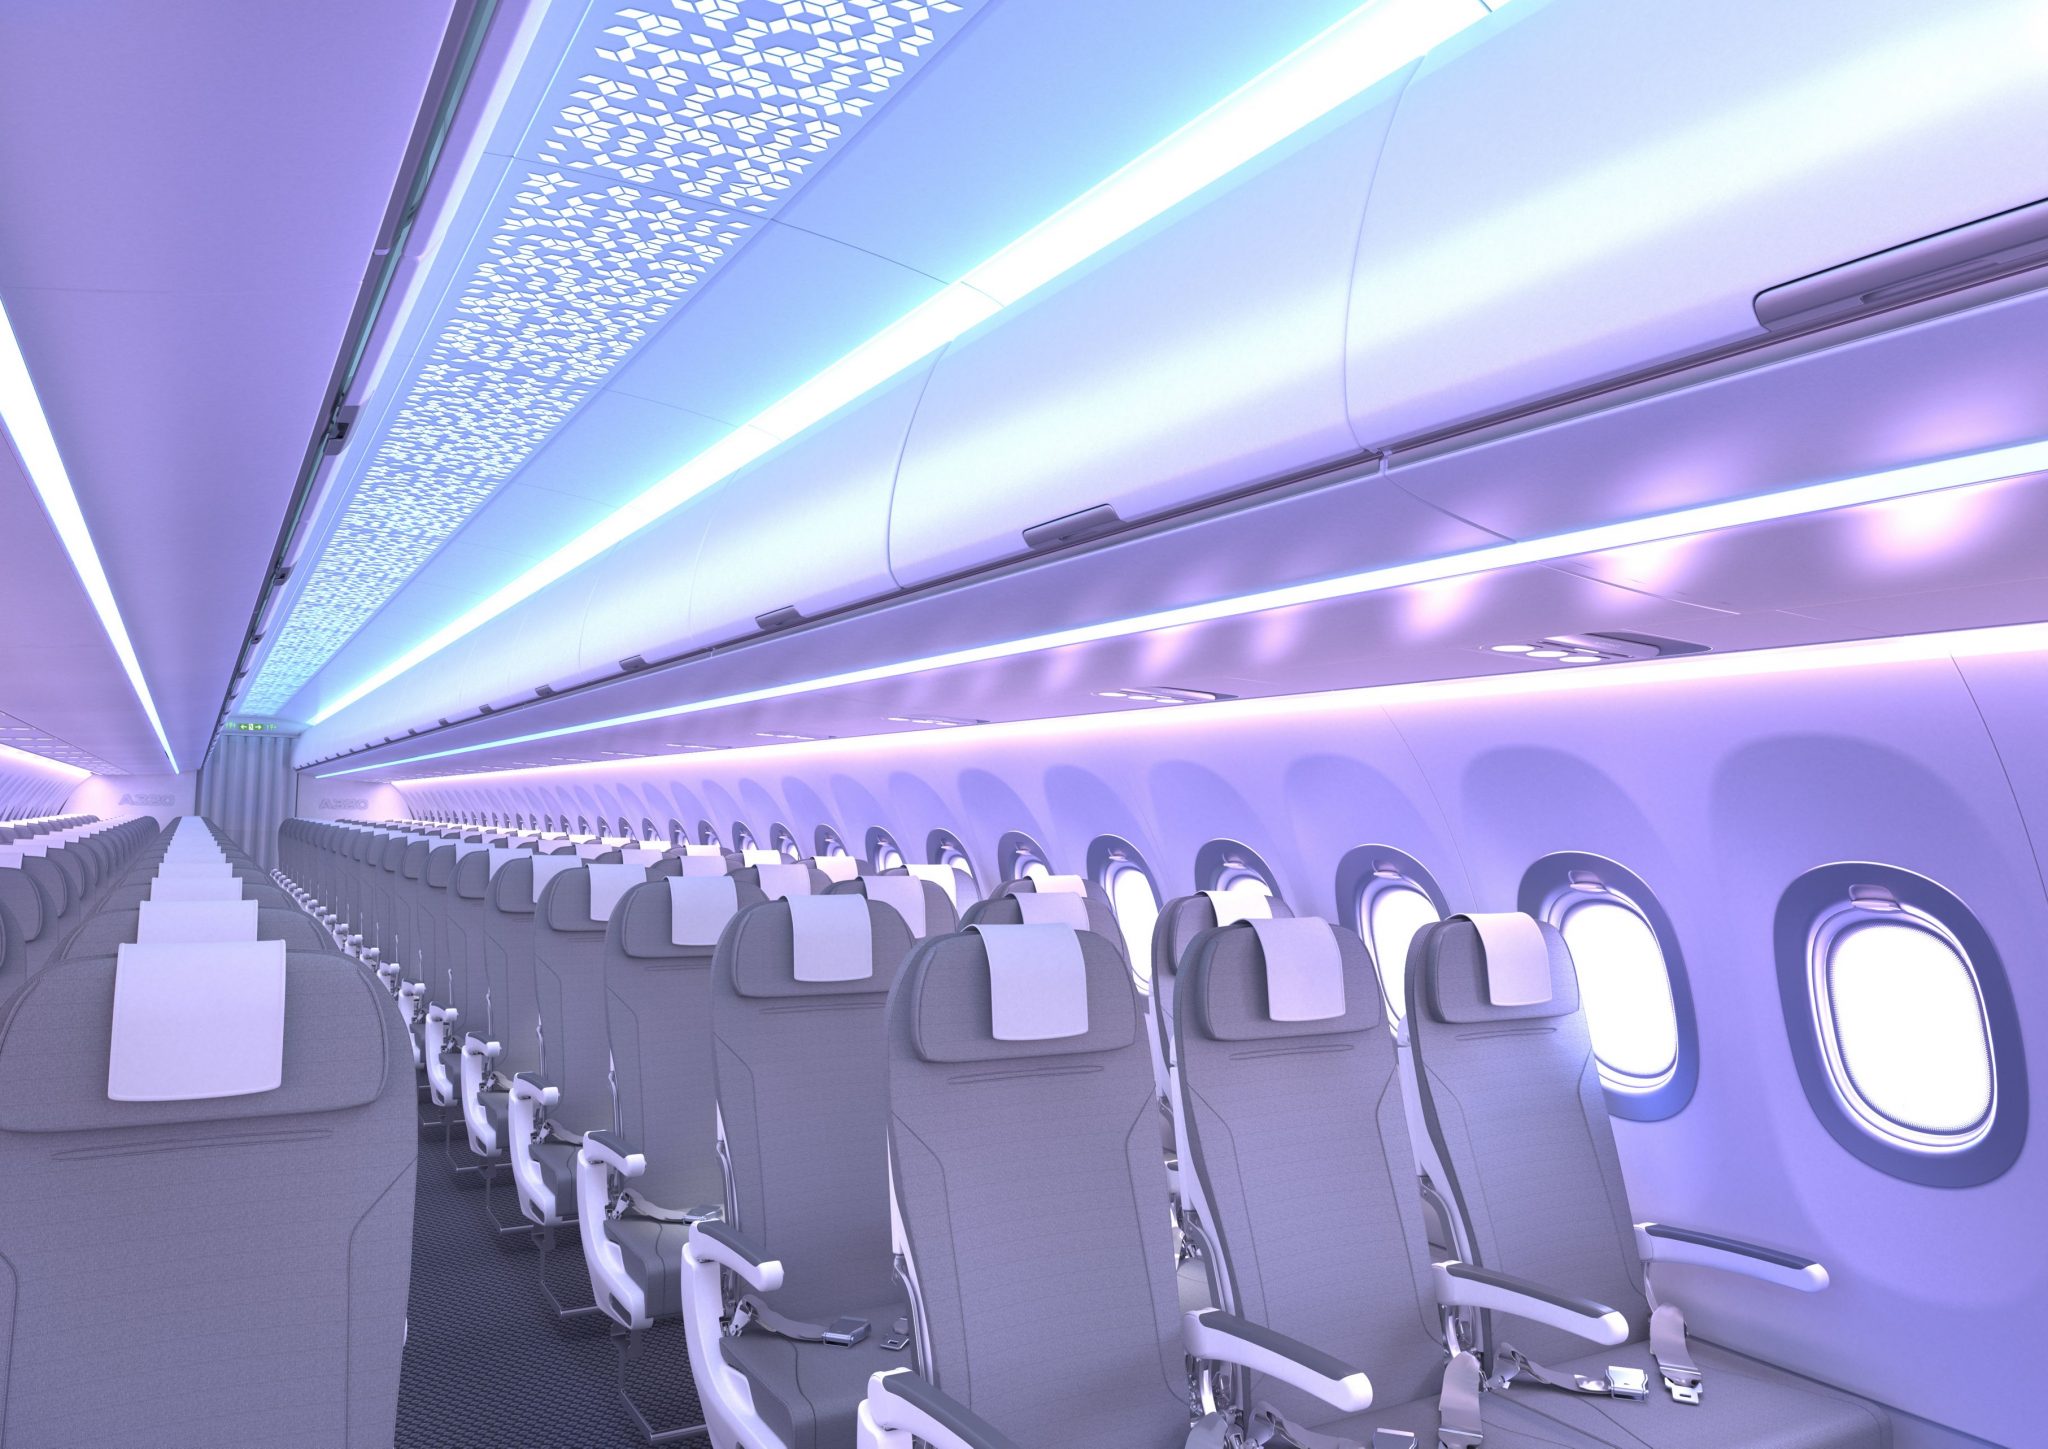 The Airbus 'Airspace' cabin features mood lighting and minor cosmetic changes. Photo Credit: Airbus